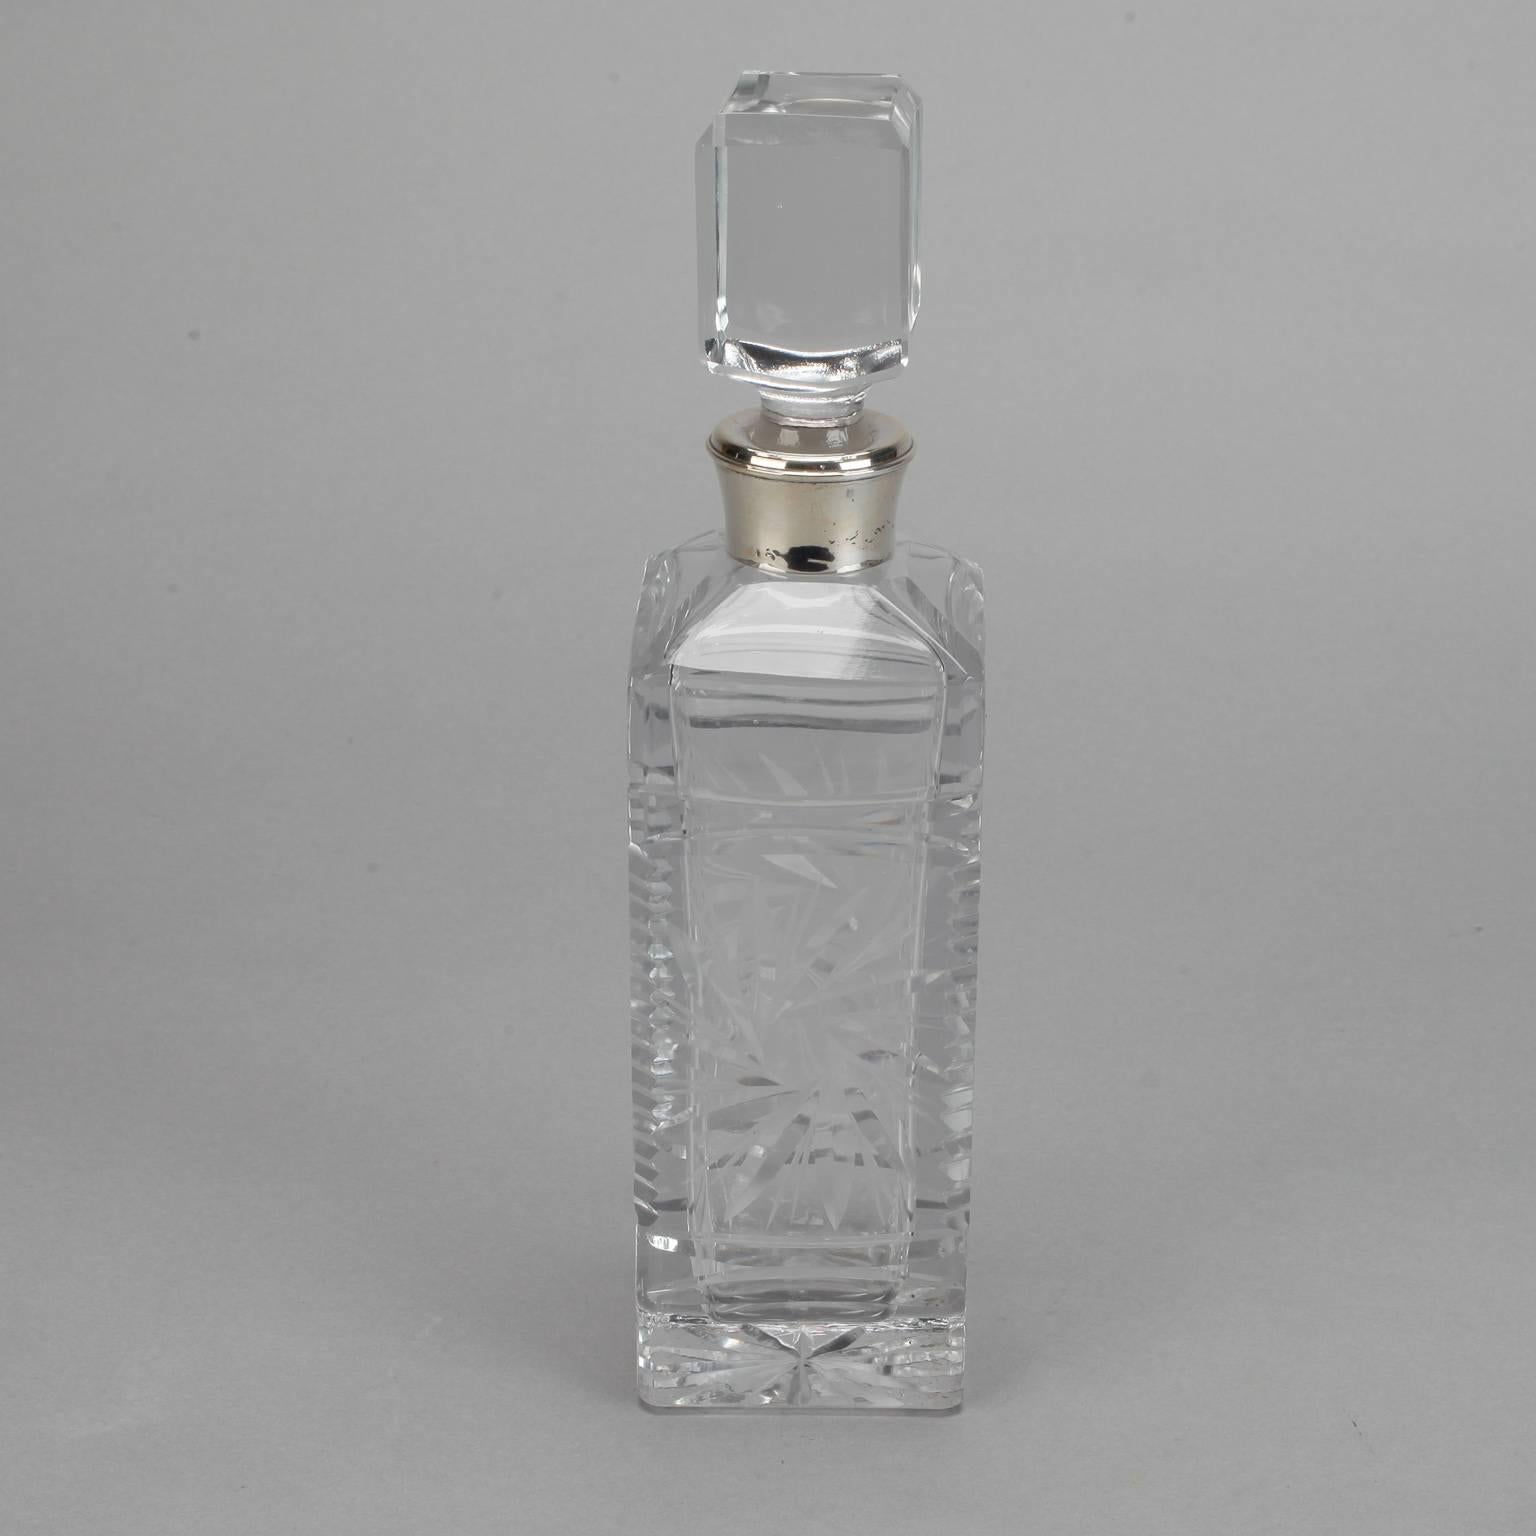 Heavy cut crystal decanter found in Belgium, circa 1930s. Rectangular vessel has ornamental starburst pattern on panels, sterling silver band around neck and large square crystal stopper.